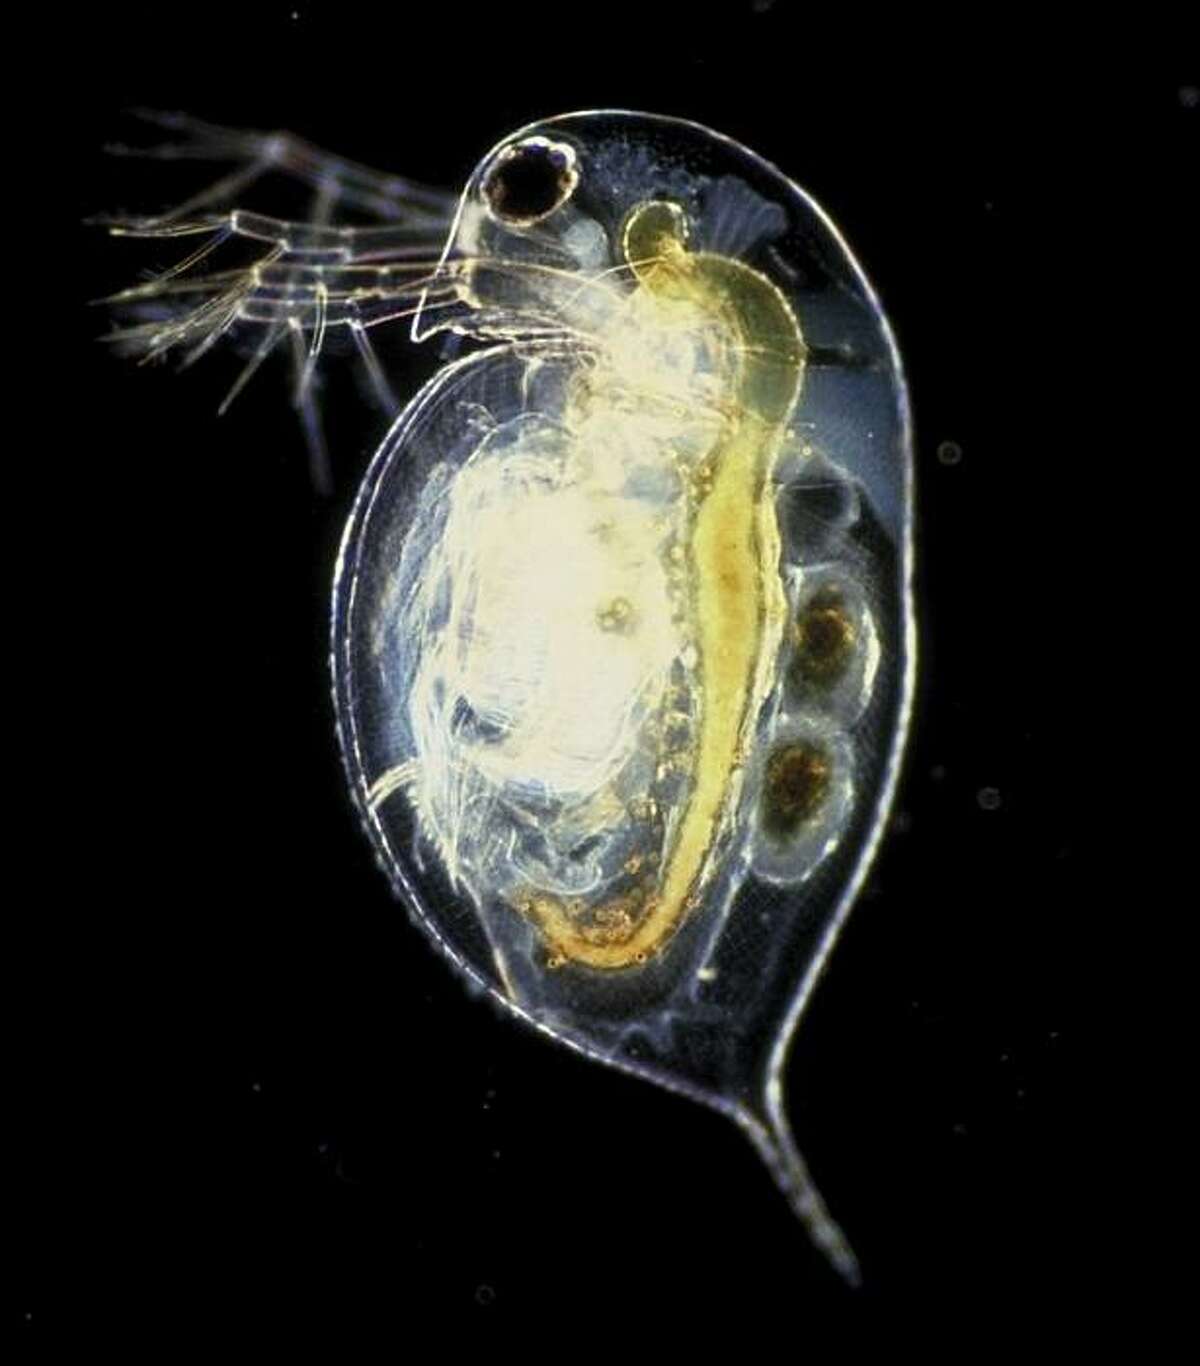 Daphnia pulex (commonly called waterflea)